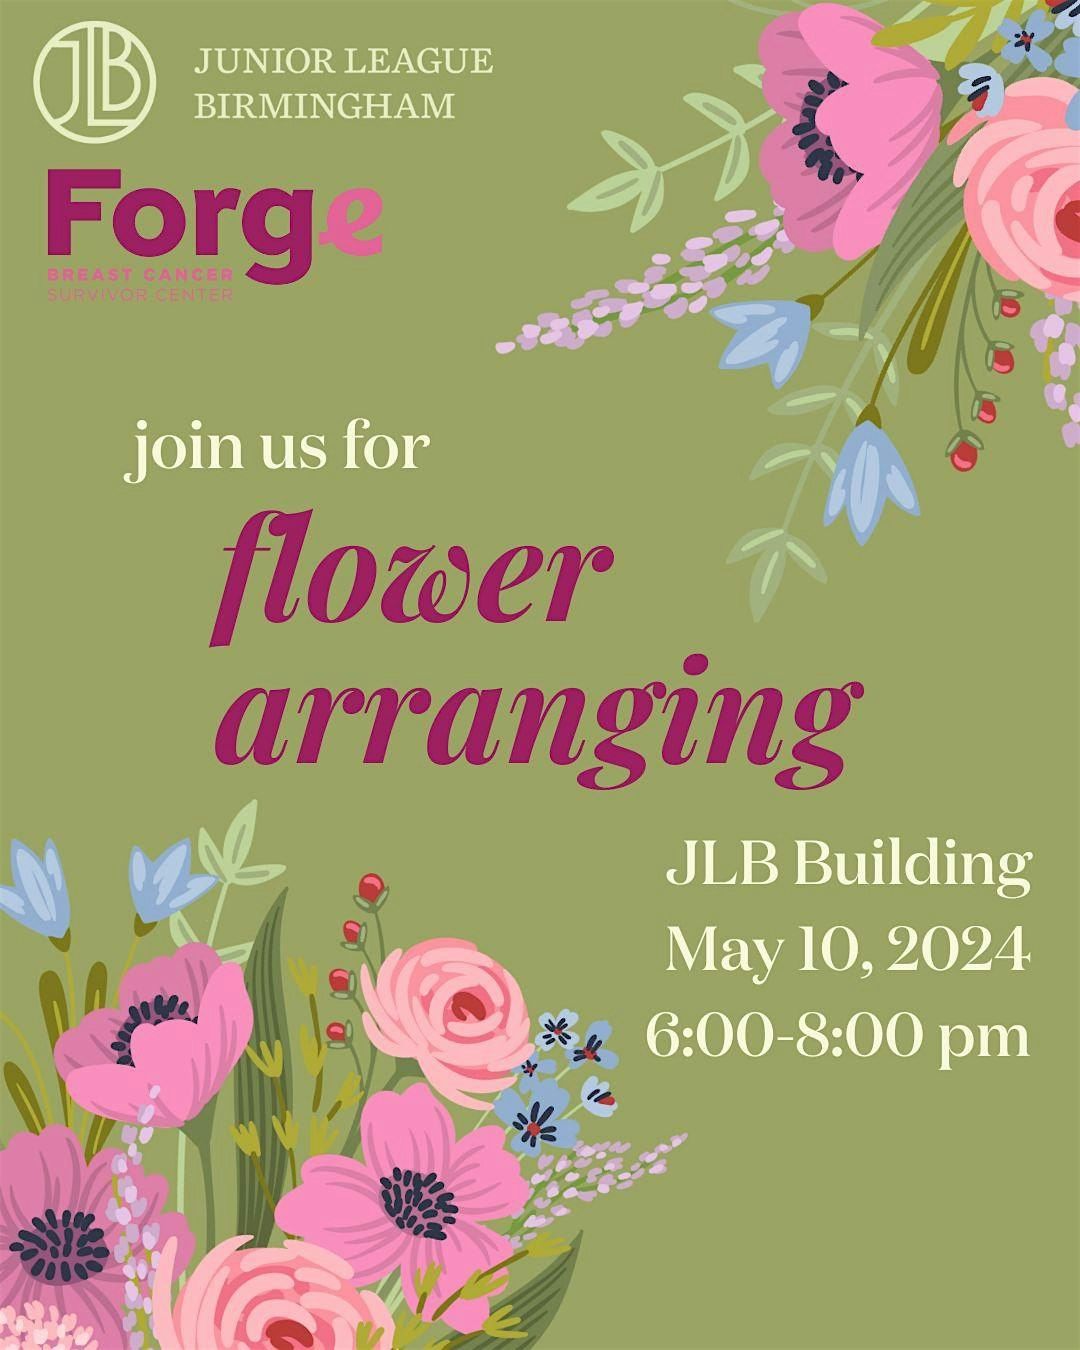 Spring Floral Arranging With The Junior League of Birmingham